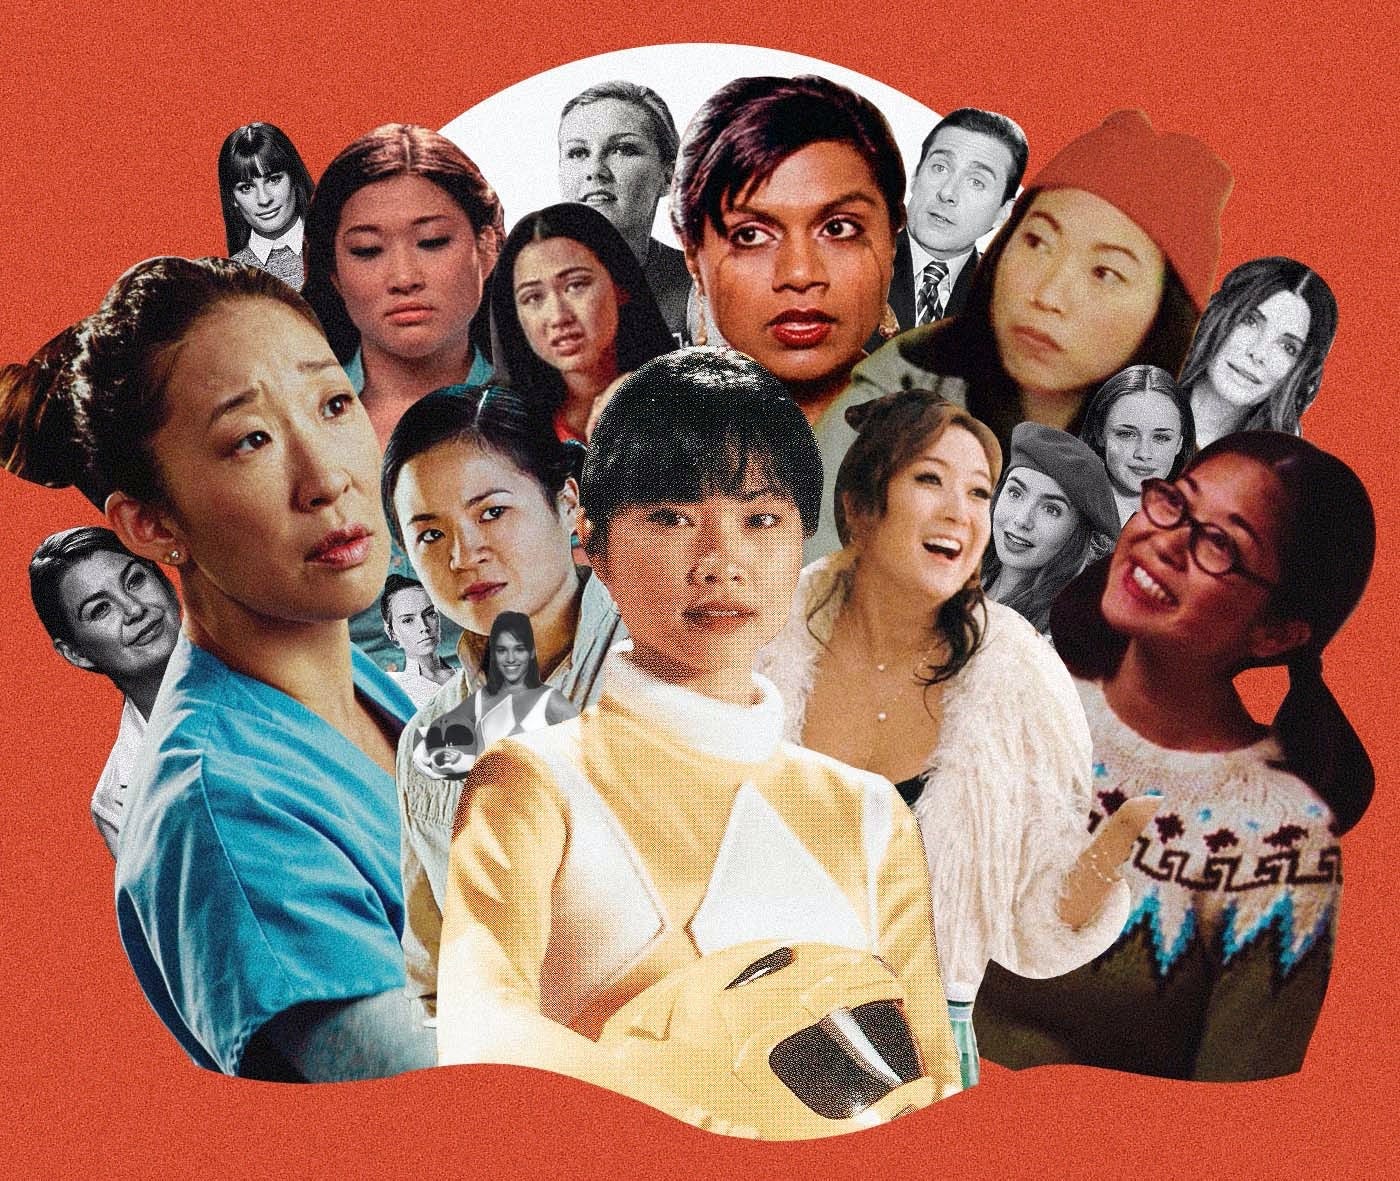 Collage of Asian supporting characters from pop culture next to the white main characters.